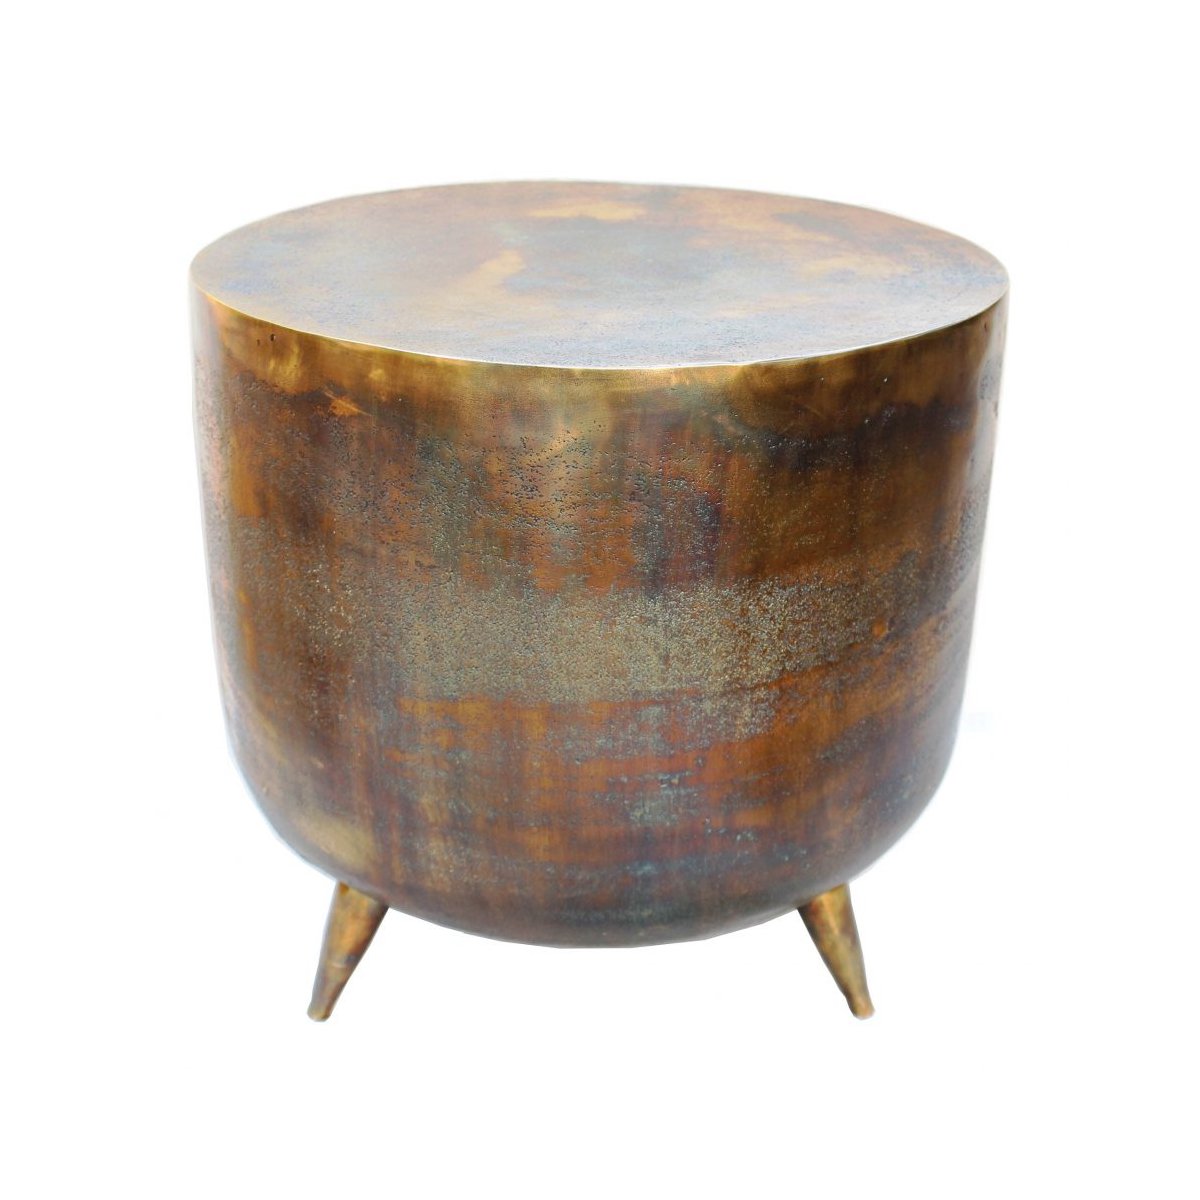 Kettel Accent Table Brass Accent Tables Moe's     Four Hands, Burke Decor, Mid Century Modern Furniture, Old Bones Furniture Company, Old Bones Co, Modern Mid Century, Designer Furniture, https://www.oldbonesco.com/